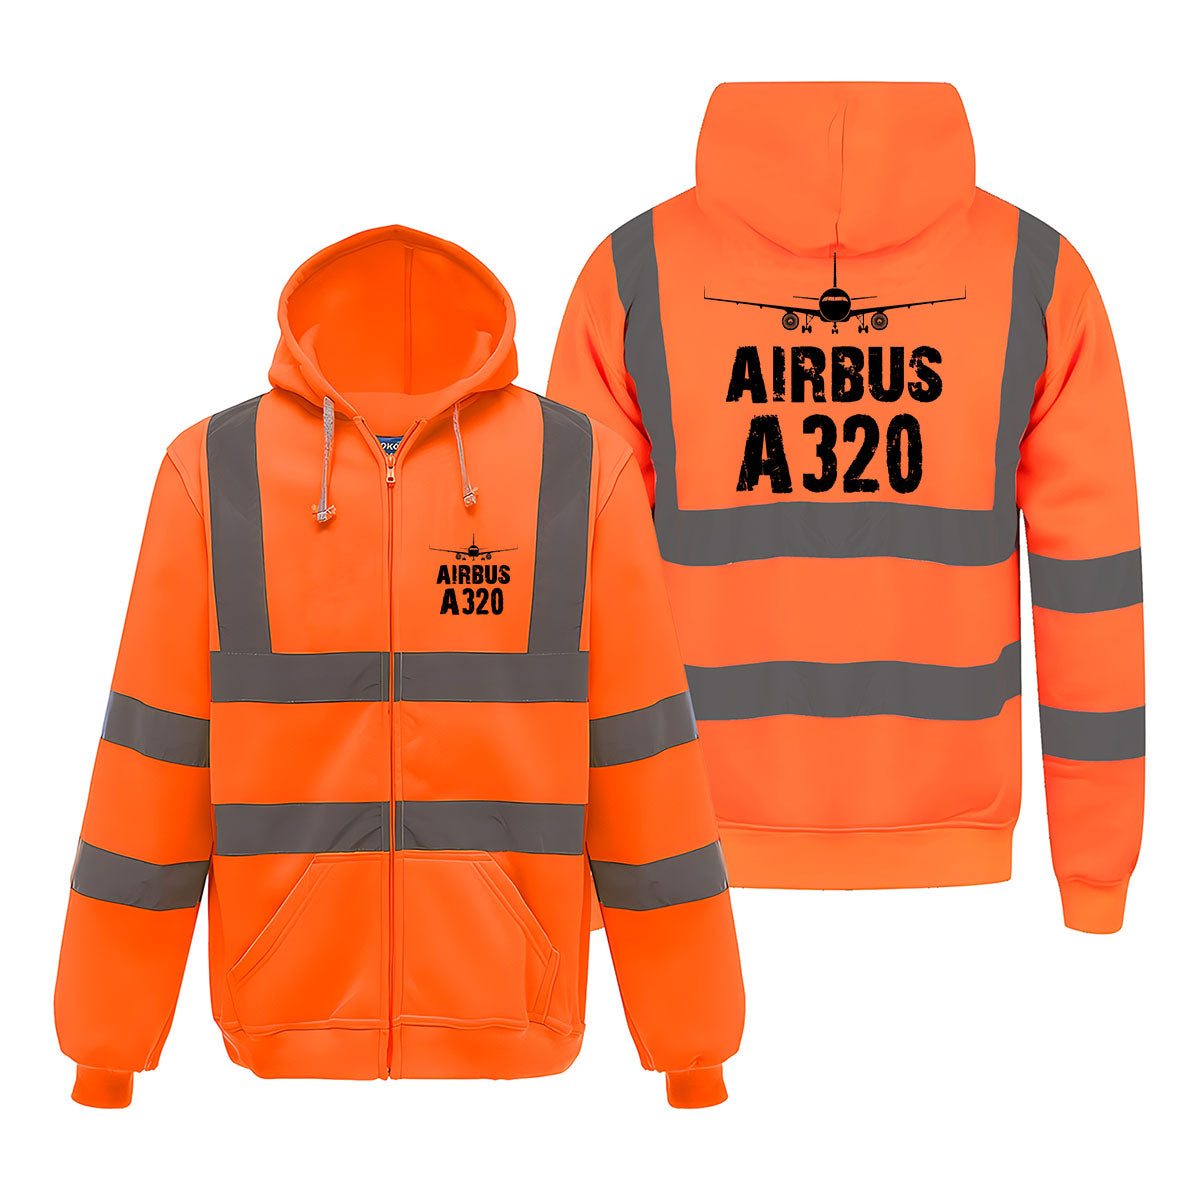 Airbus A320 & Plane Designed Reflective Zipped Hoodies